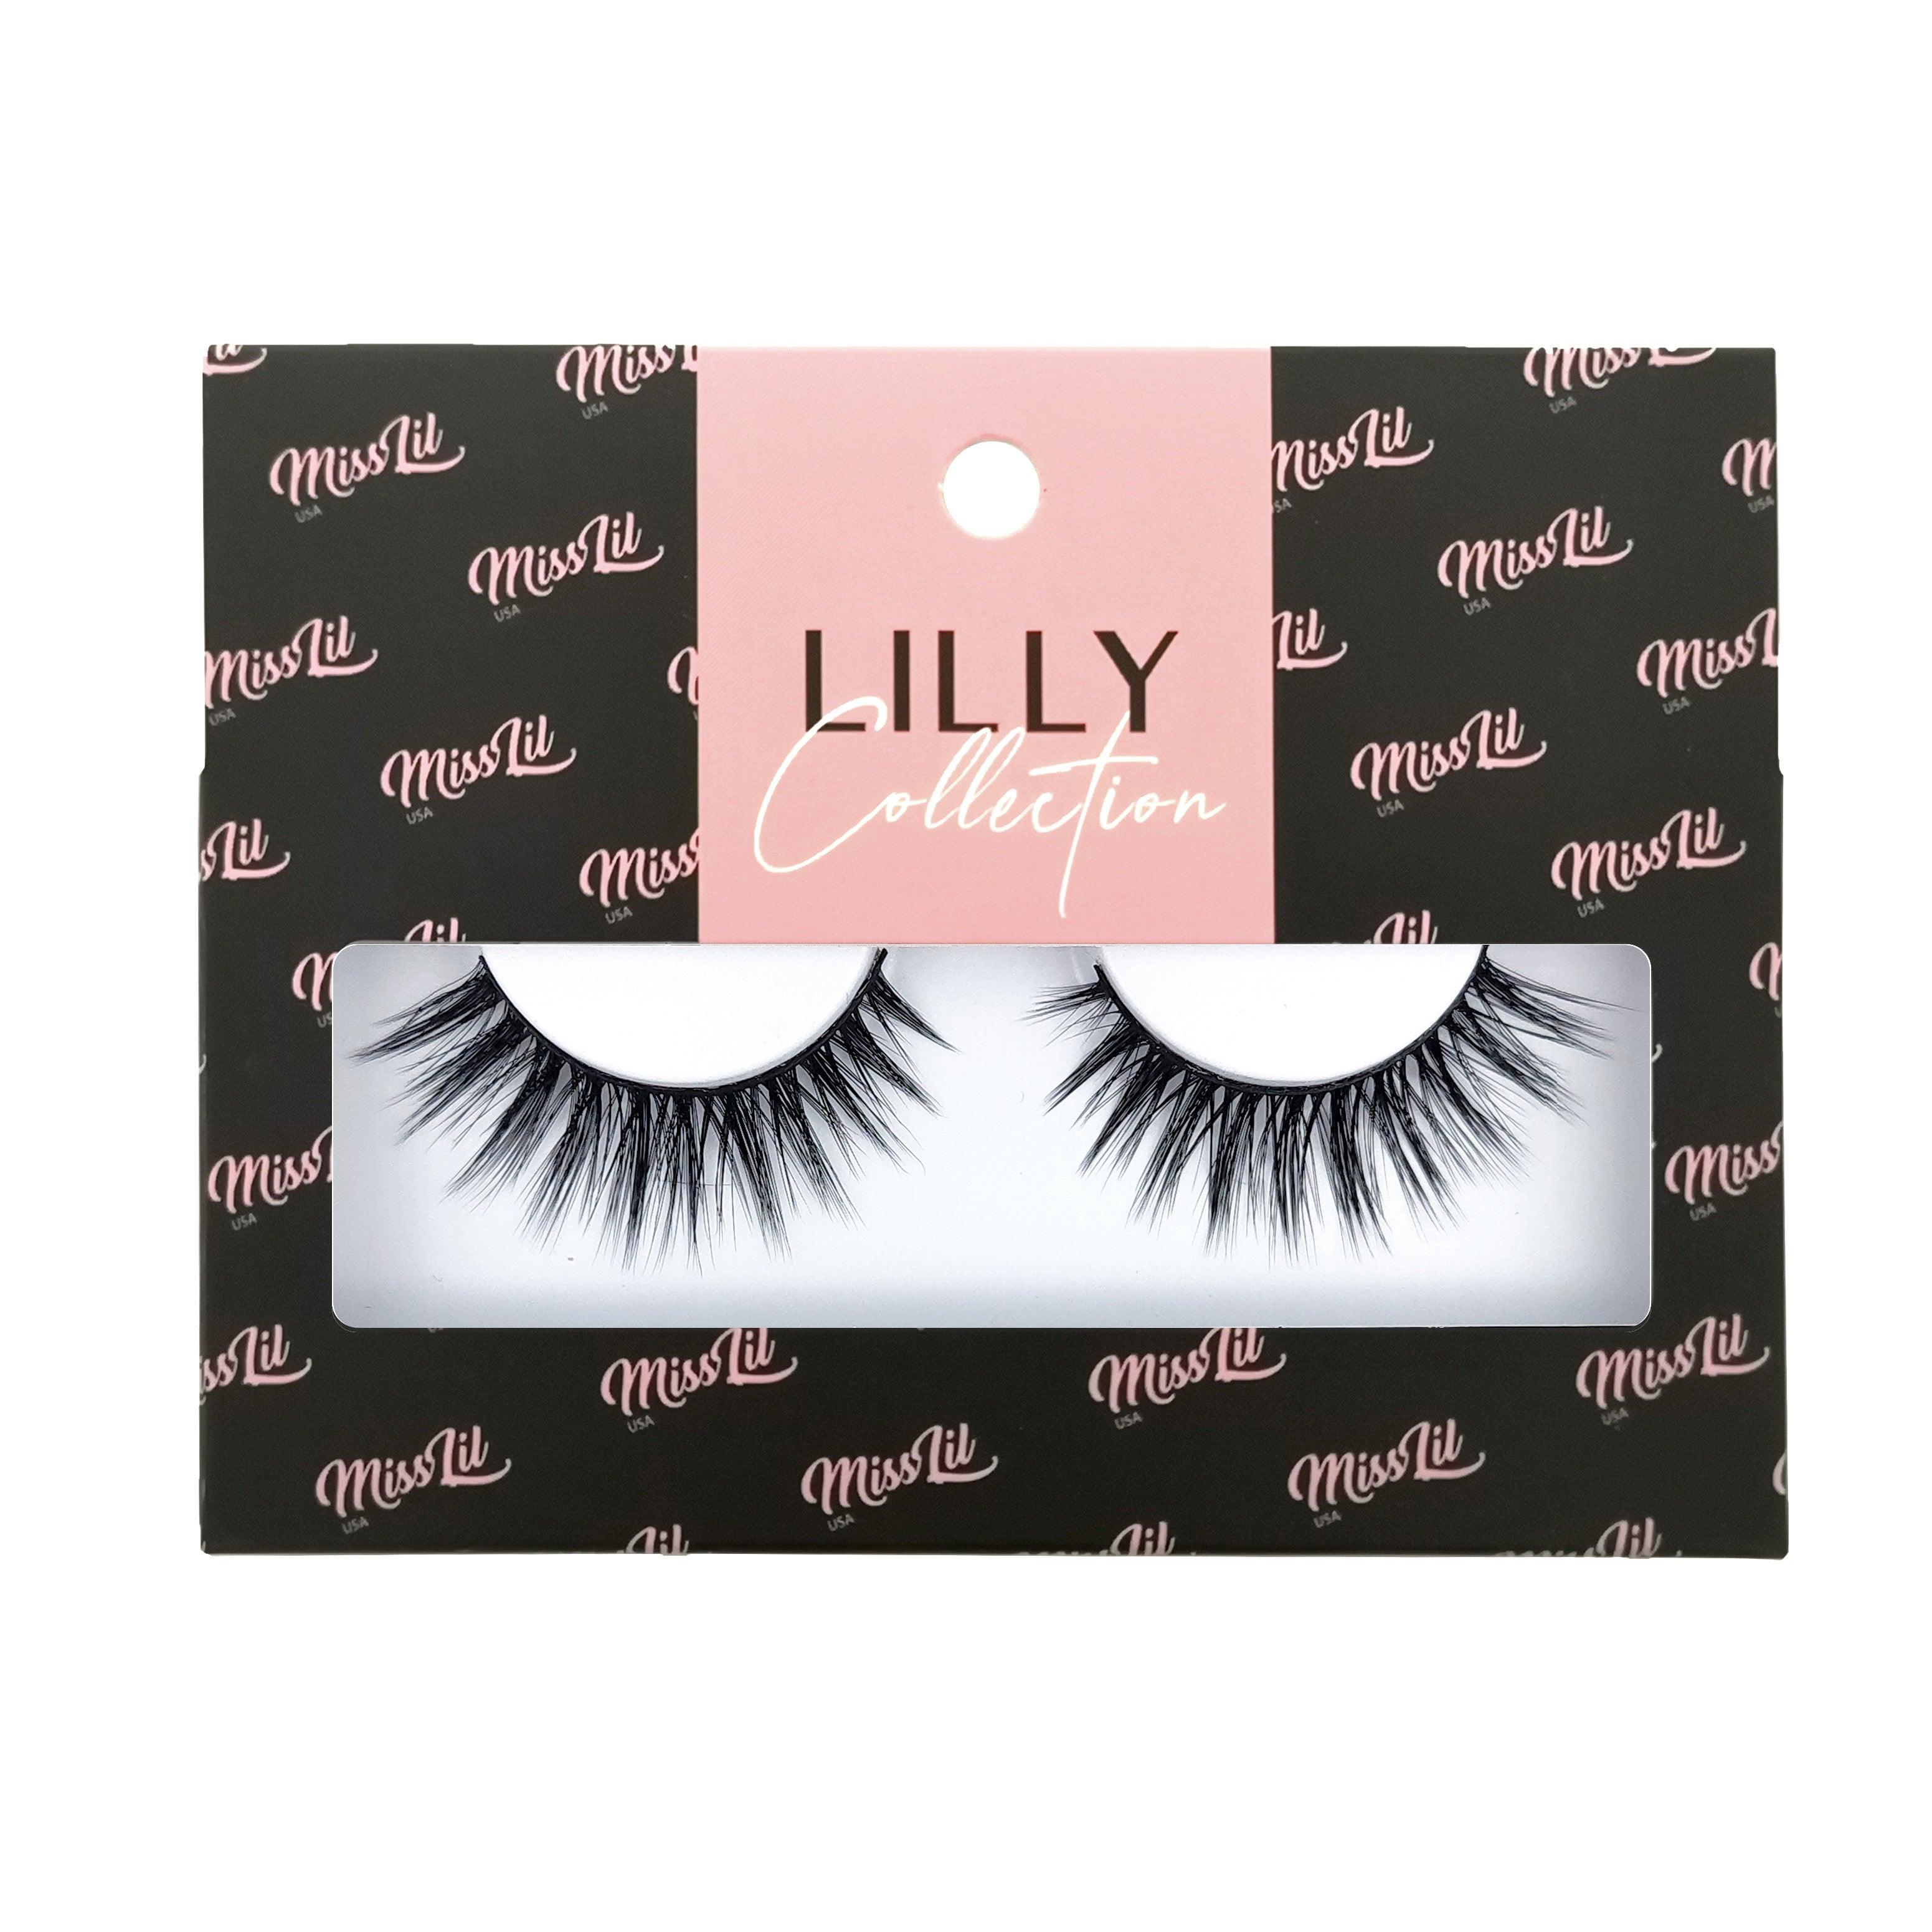 1-Pair Lashes-Lilly Collection #32 (Pack of 12) - Miss Lil USA Wholesale